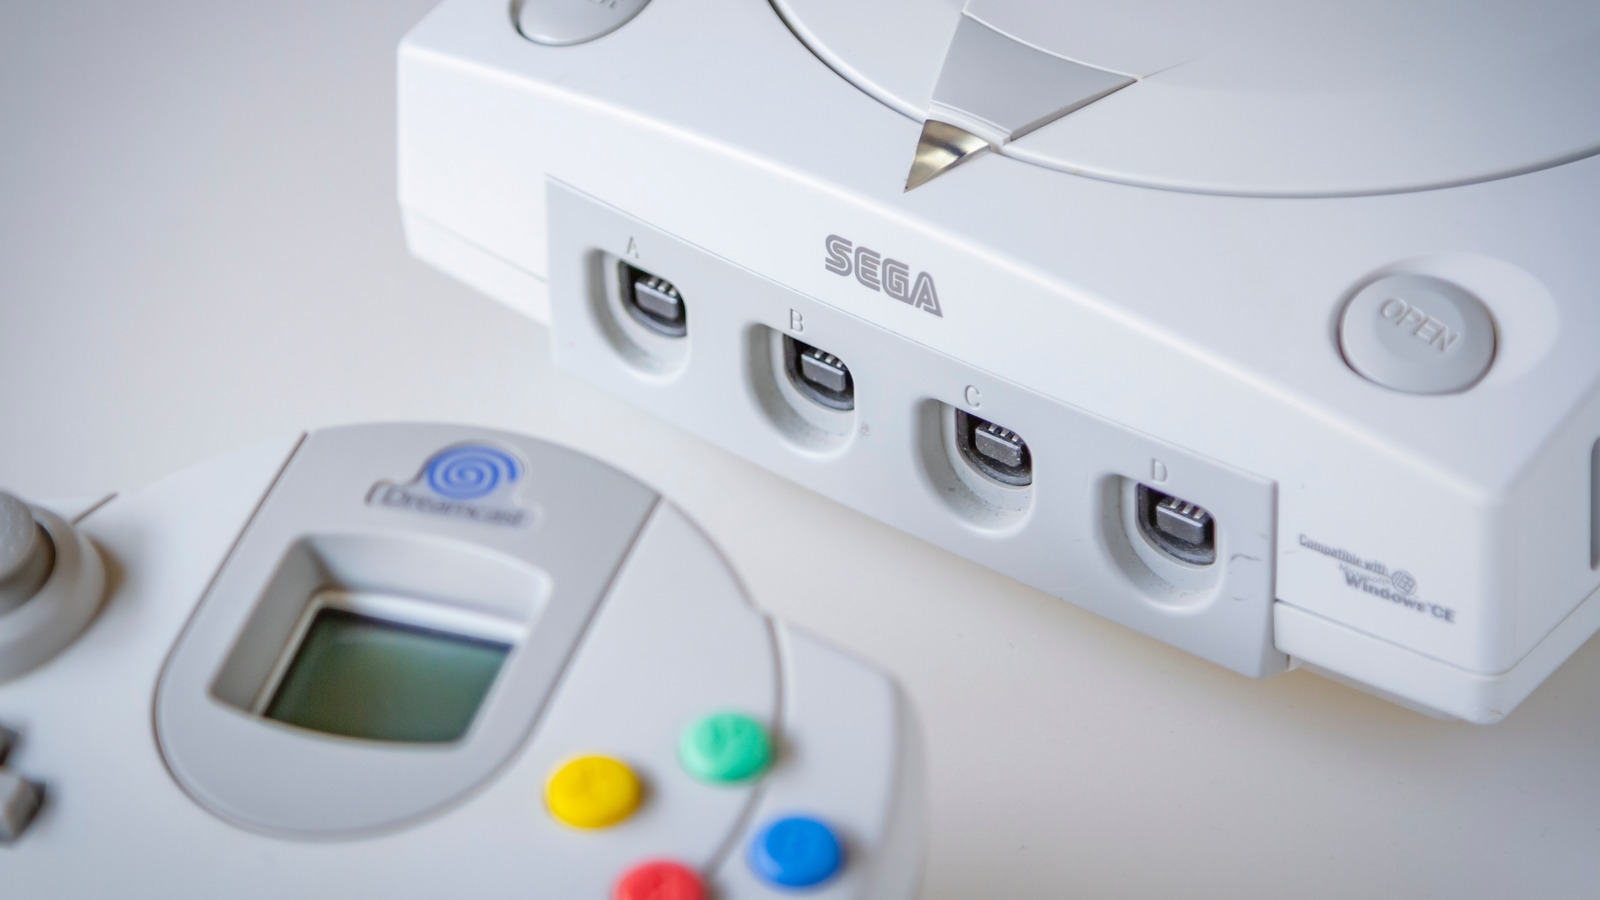 https://www.svg.com/img/gallery/after-over-two-decades-the-sega-dreamcast-is-getting-a-new-upgrade/l-intro-1664204626.jpg